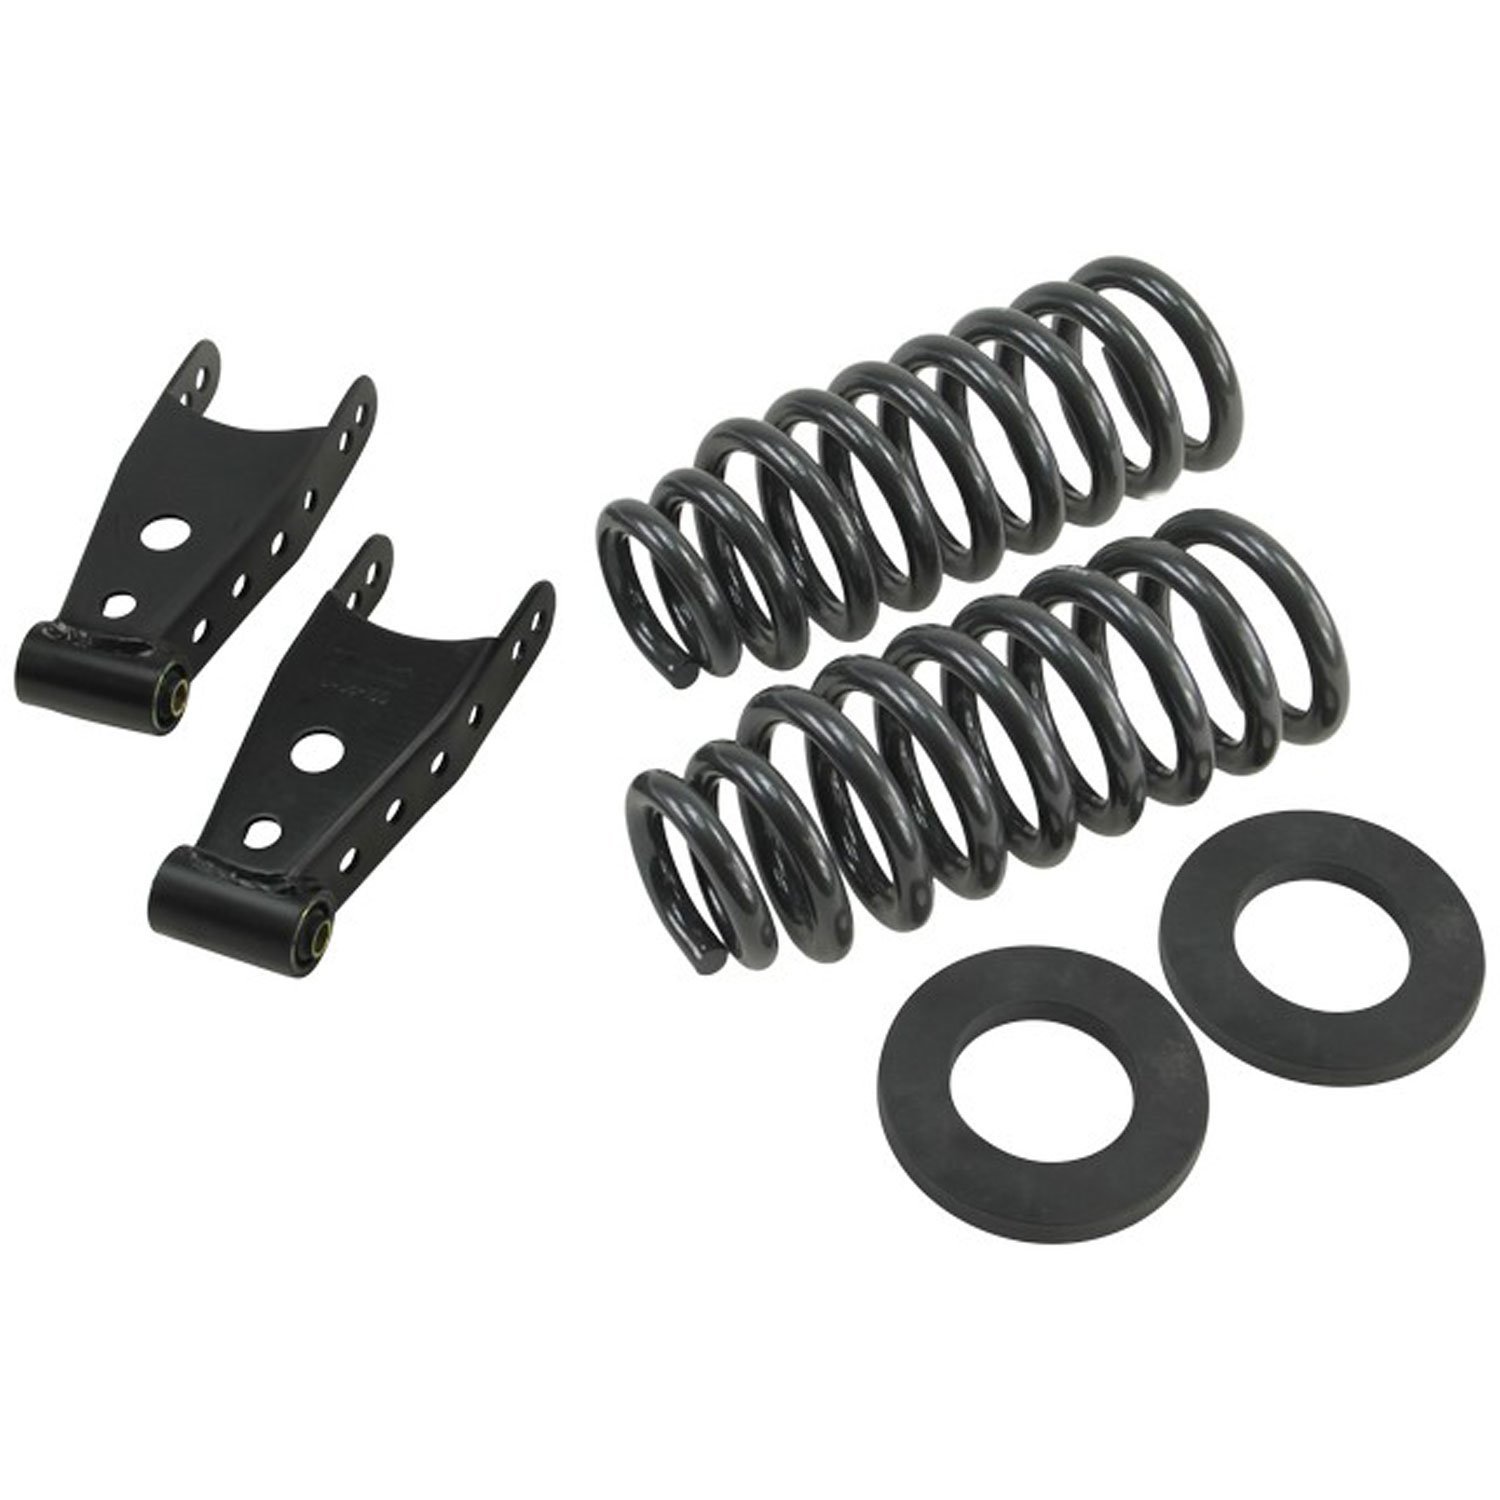 Complete Lowering Kit for 2009-2013 Ford F150